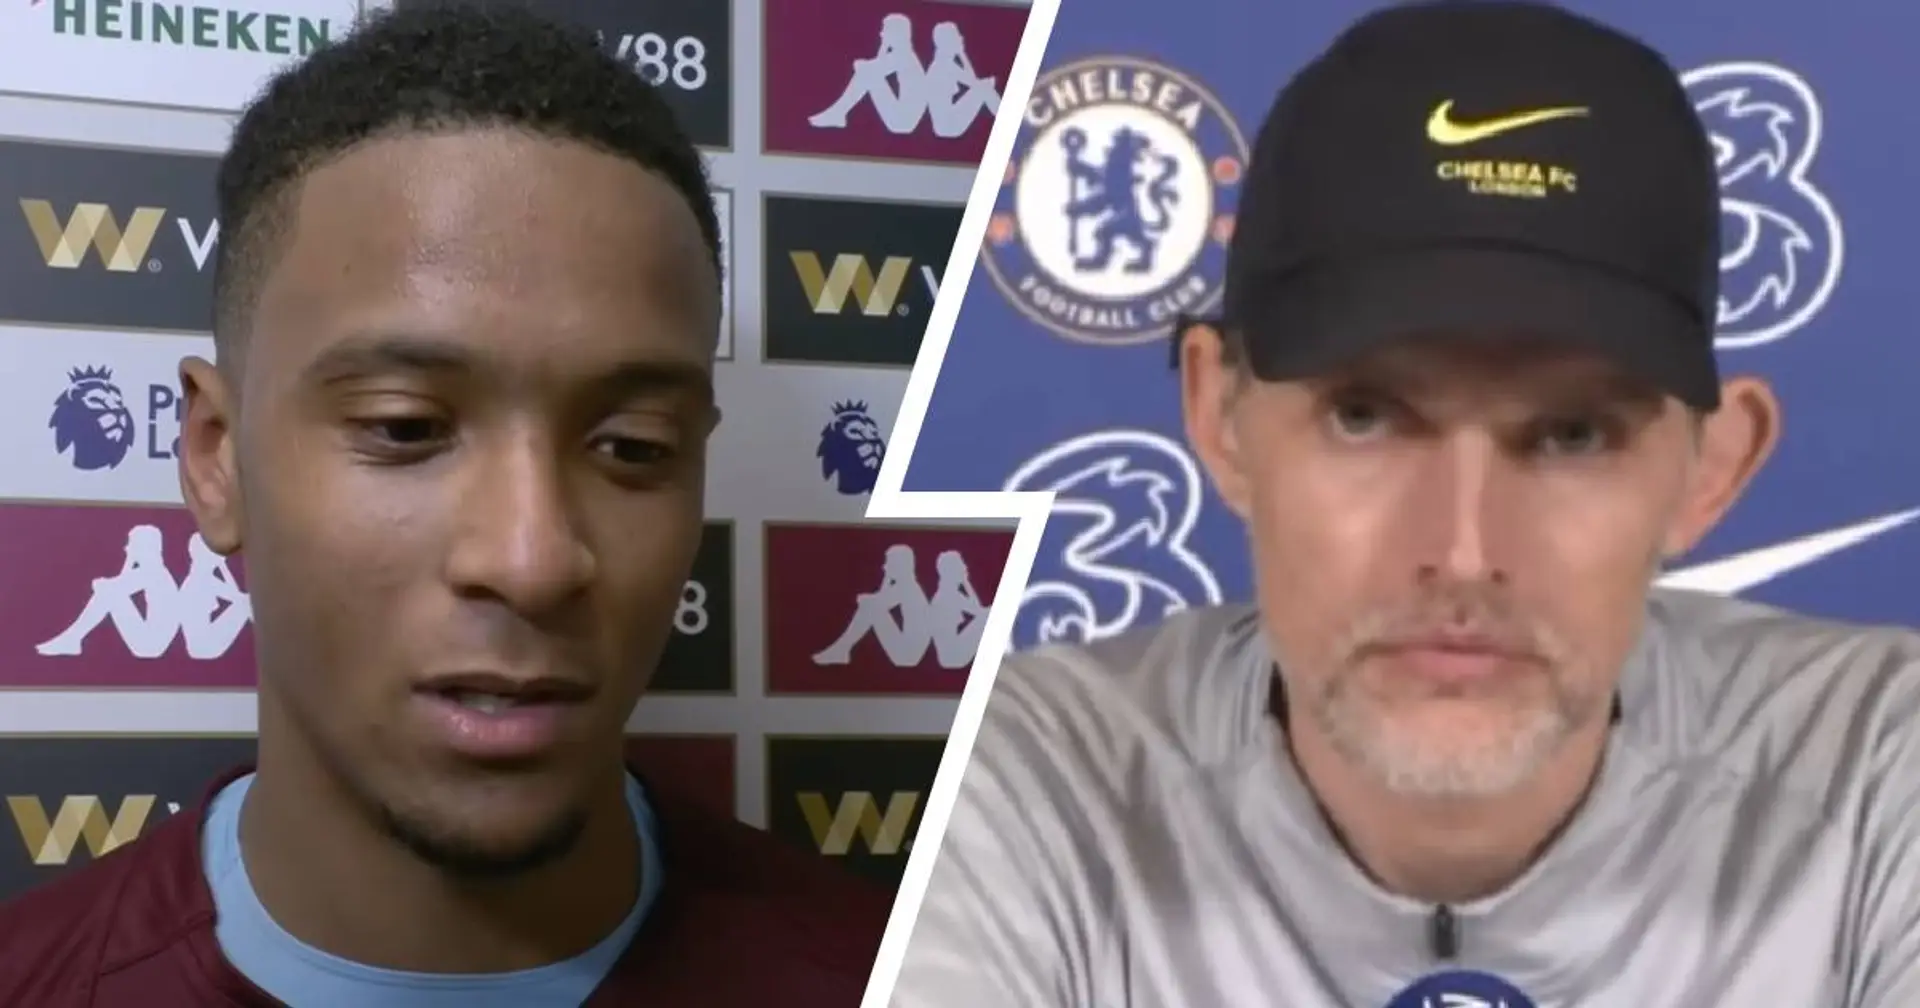 'Chelsea haven't been doing too well - we'll try to hurt them': Villa defender Konsa previews Blues clash